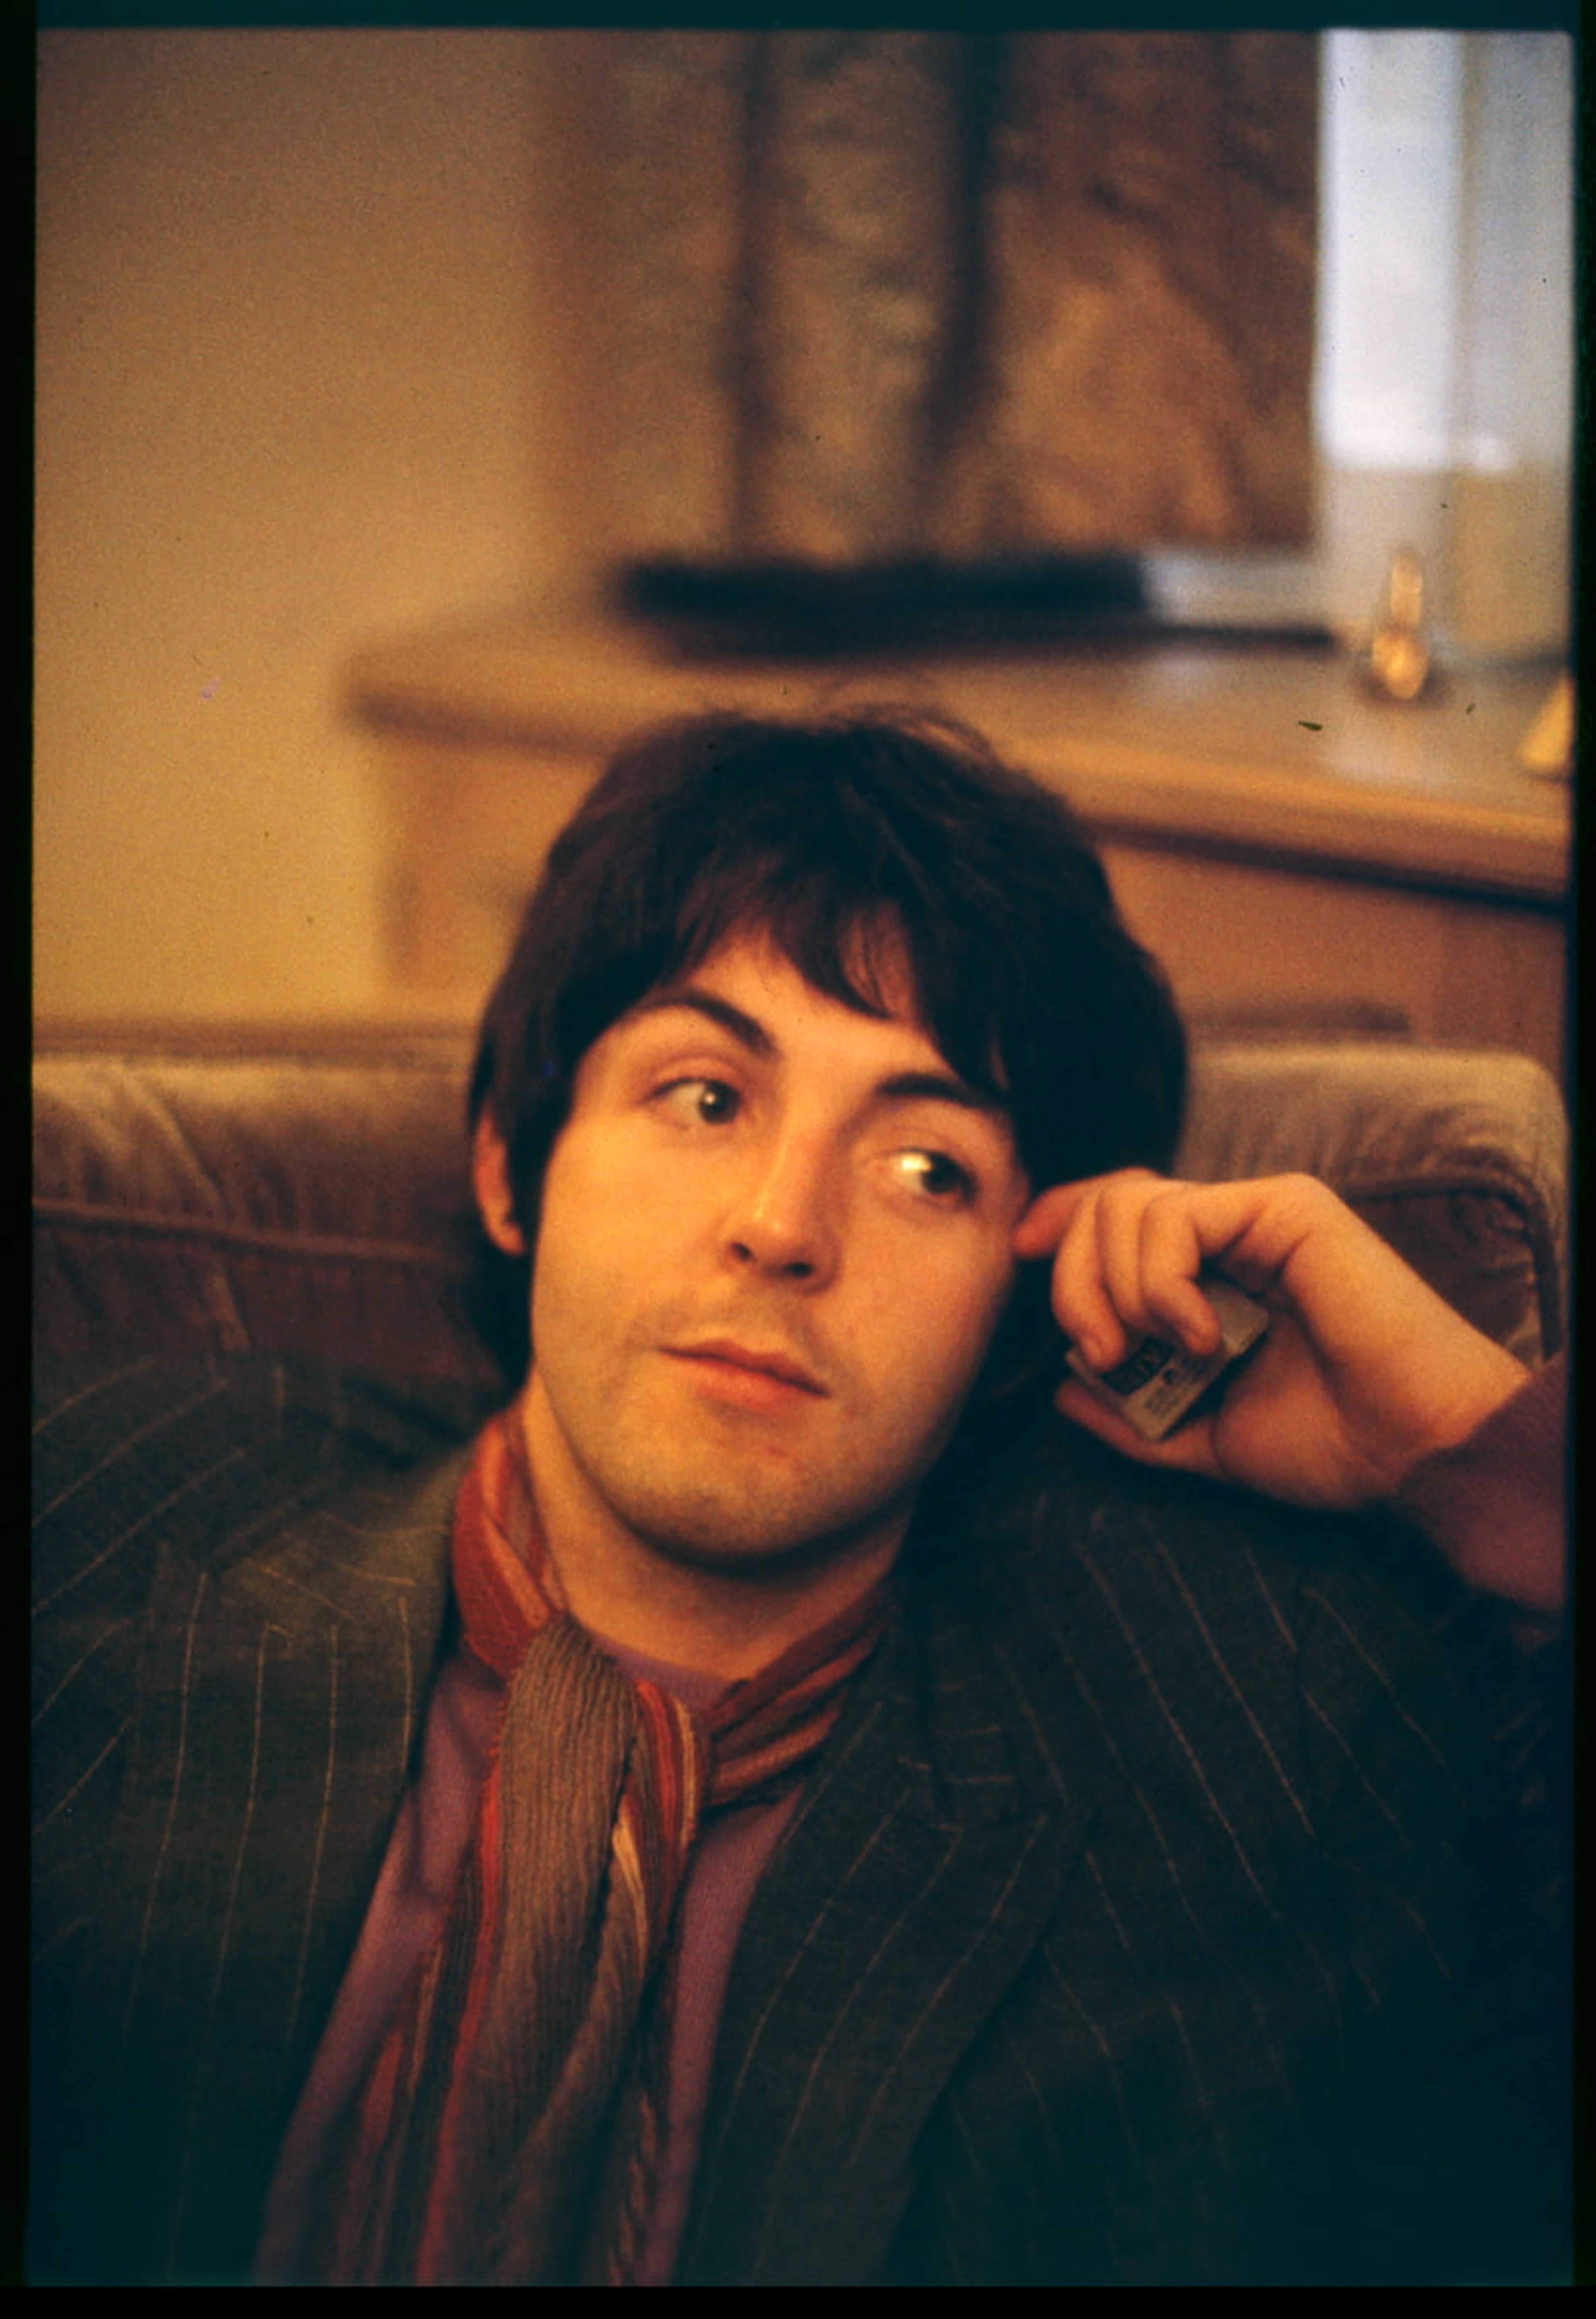 During the press launch for Sgt. Pepper's Lonely Hearts Club Band and the first time Linda McCartney (née Eastman) photographed Paul. London, 19th May 1967